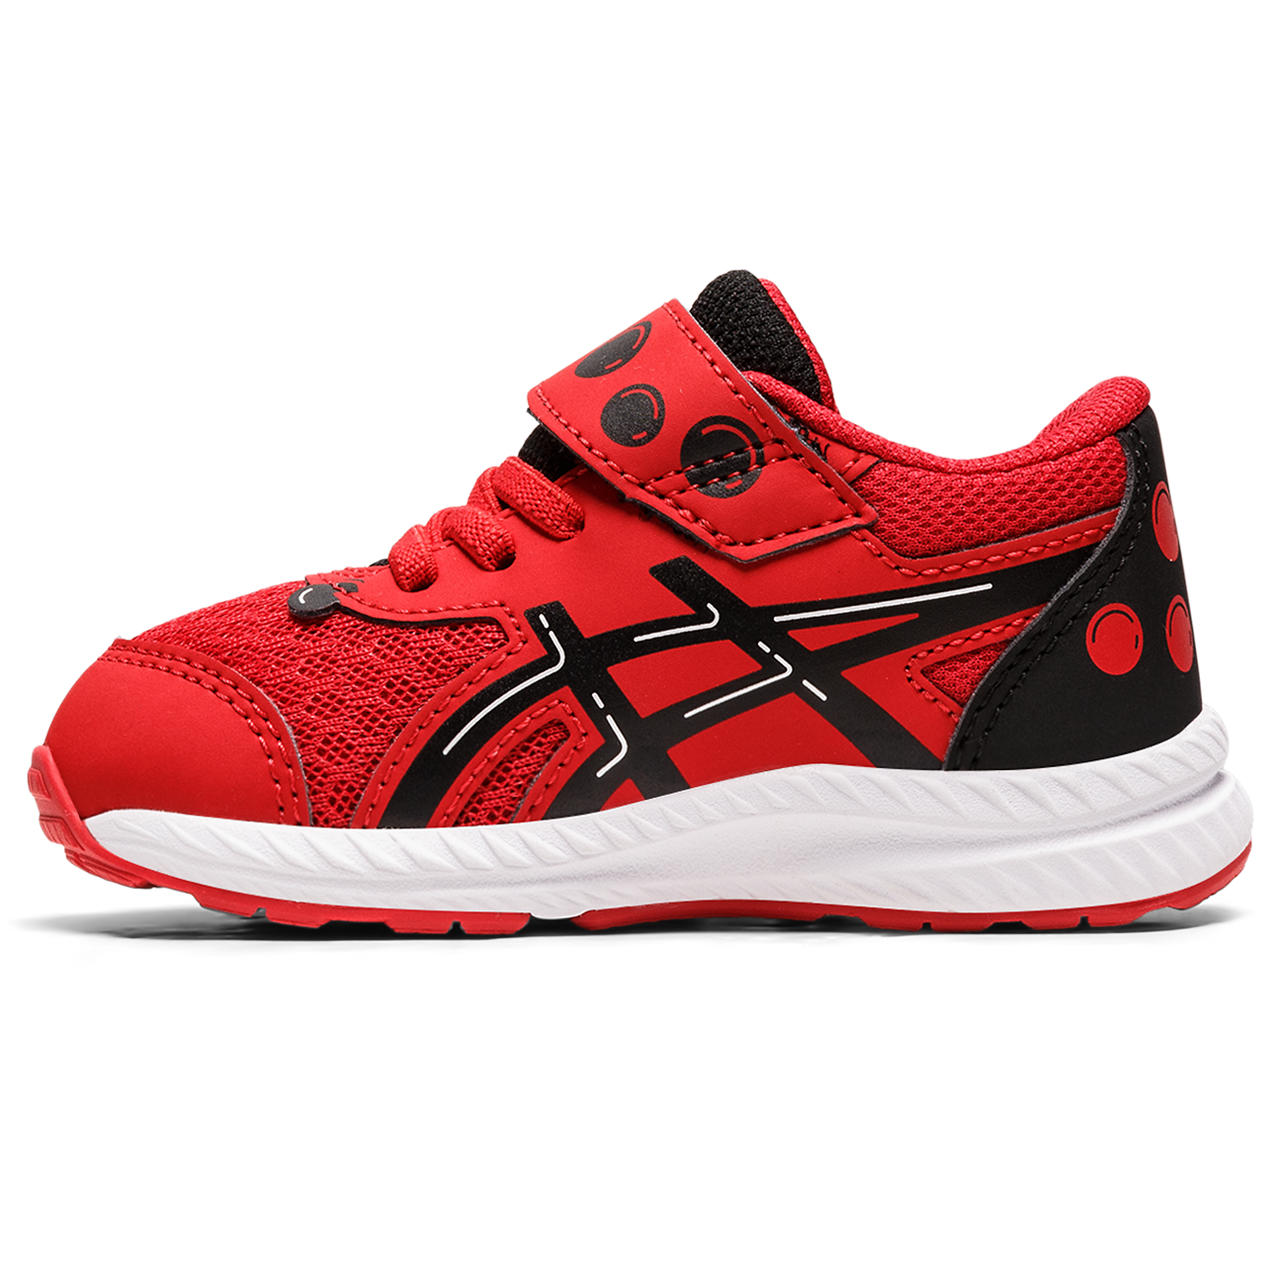 ASICS CONTEND 8 TS SCHOOL YARD image number null